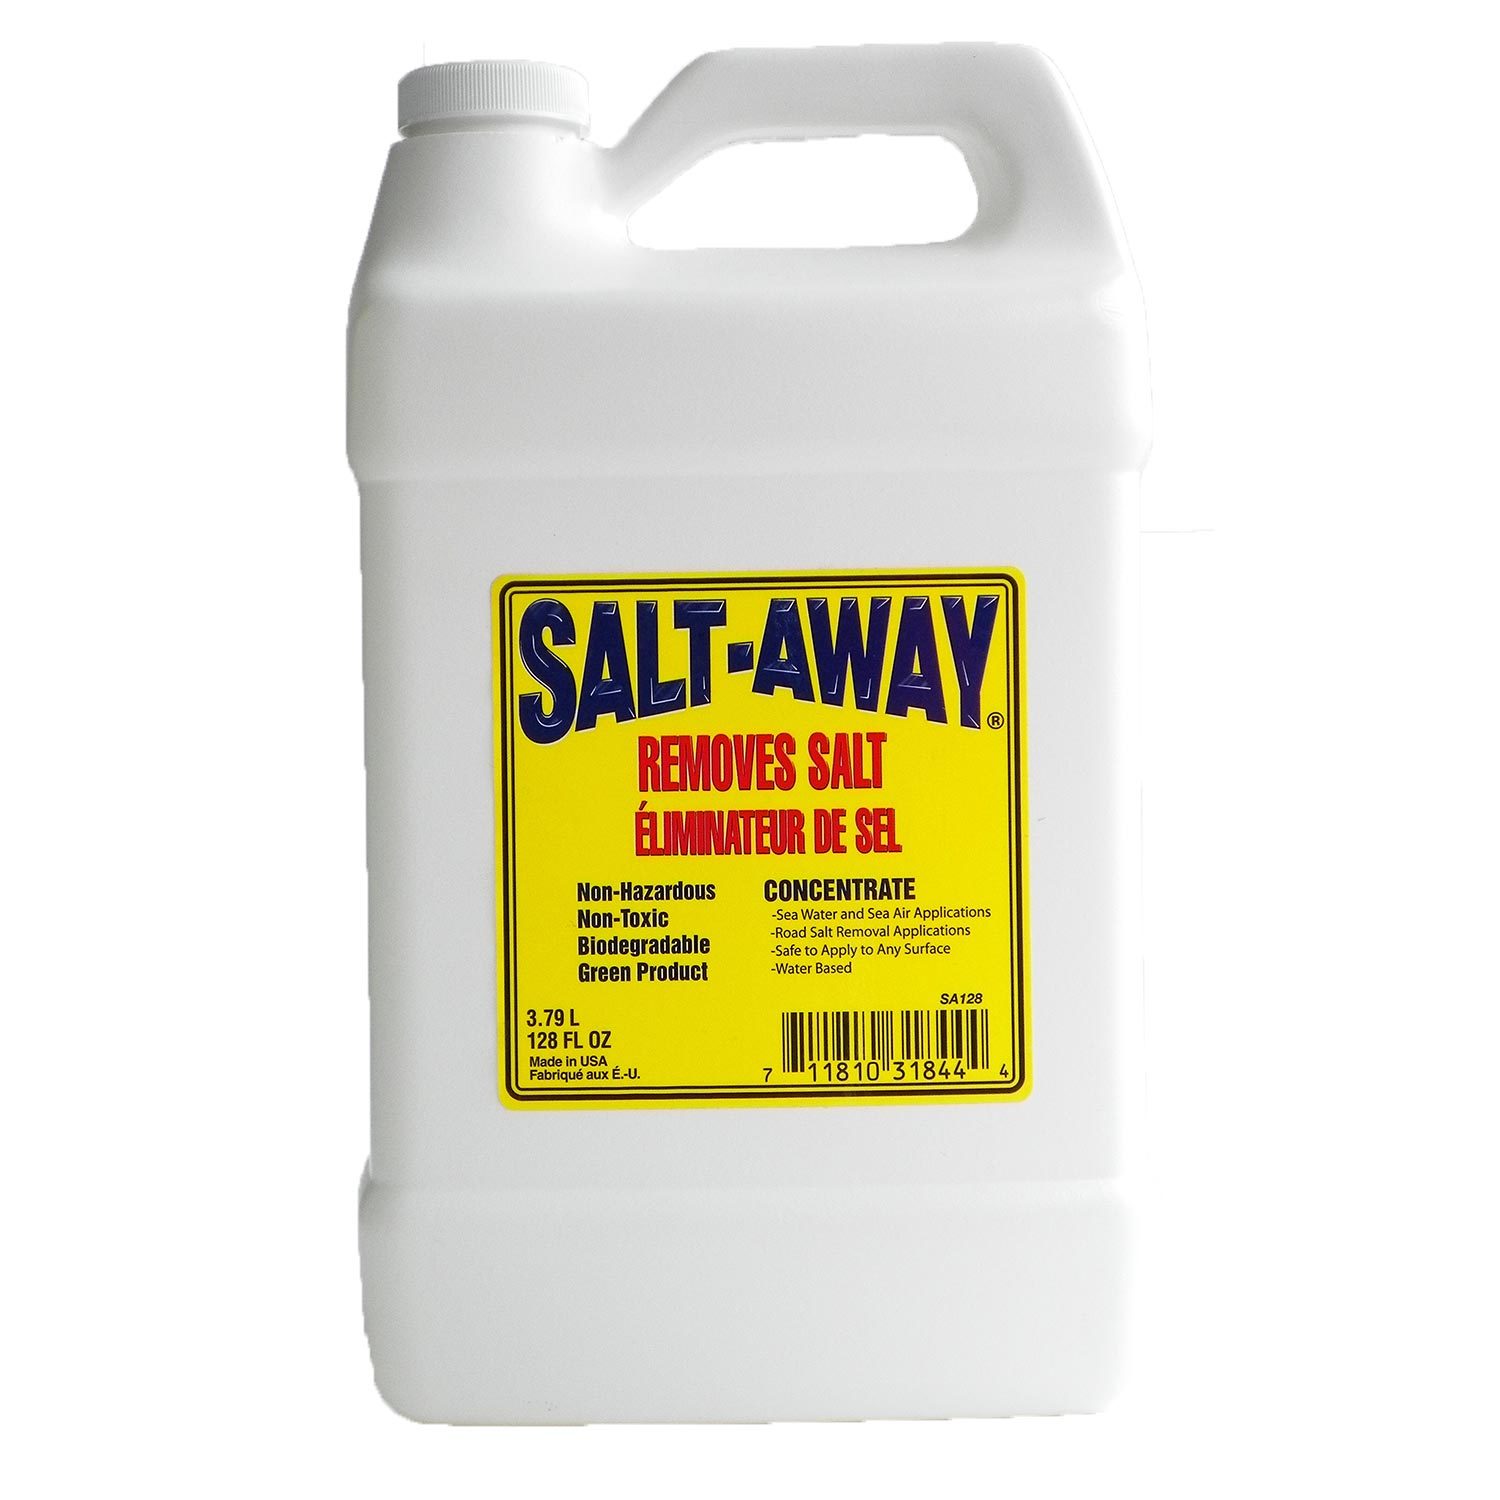 Salt-Away a must-have for boaties